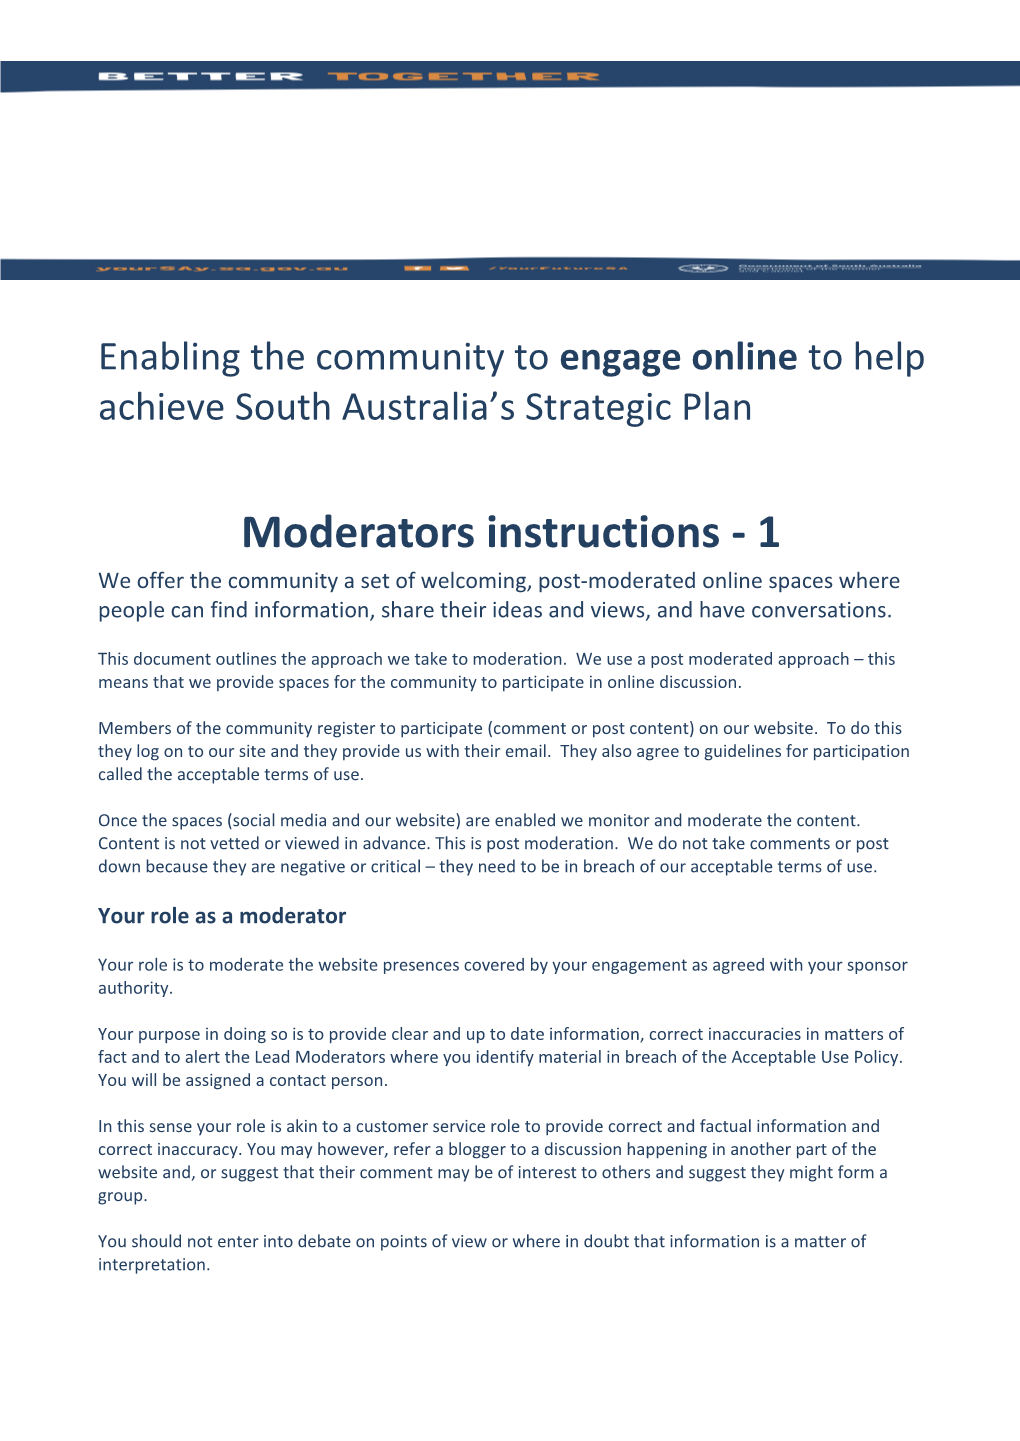 Enabling the Community to Engage Online to Help Achieve South Australia S Strategic Plan